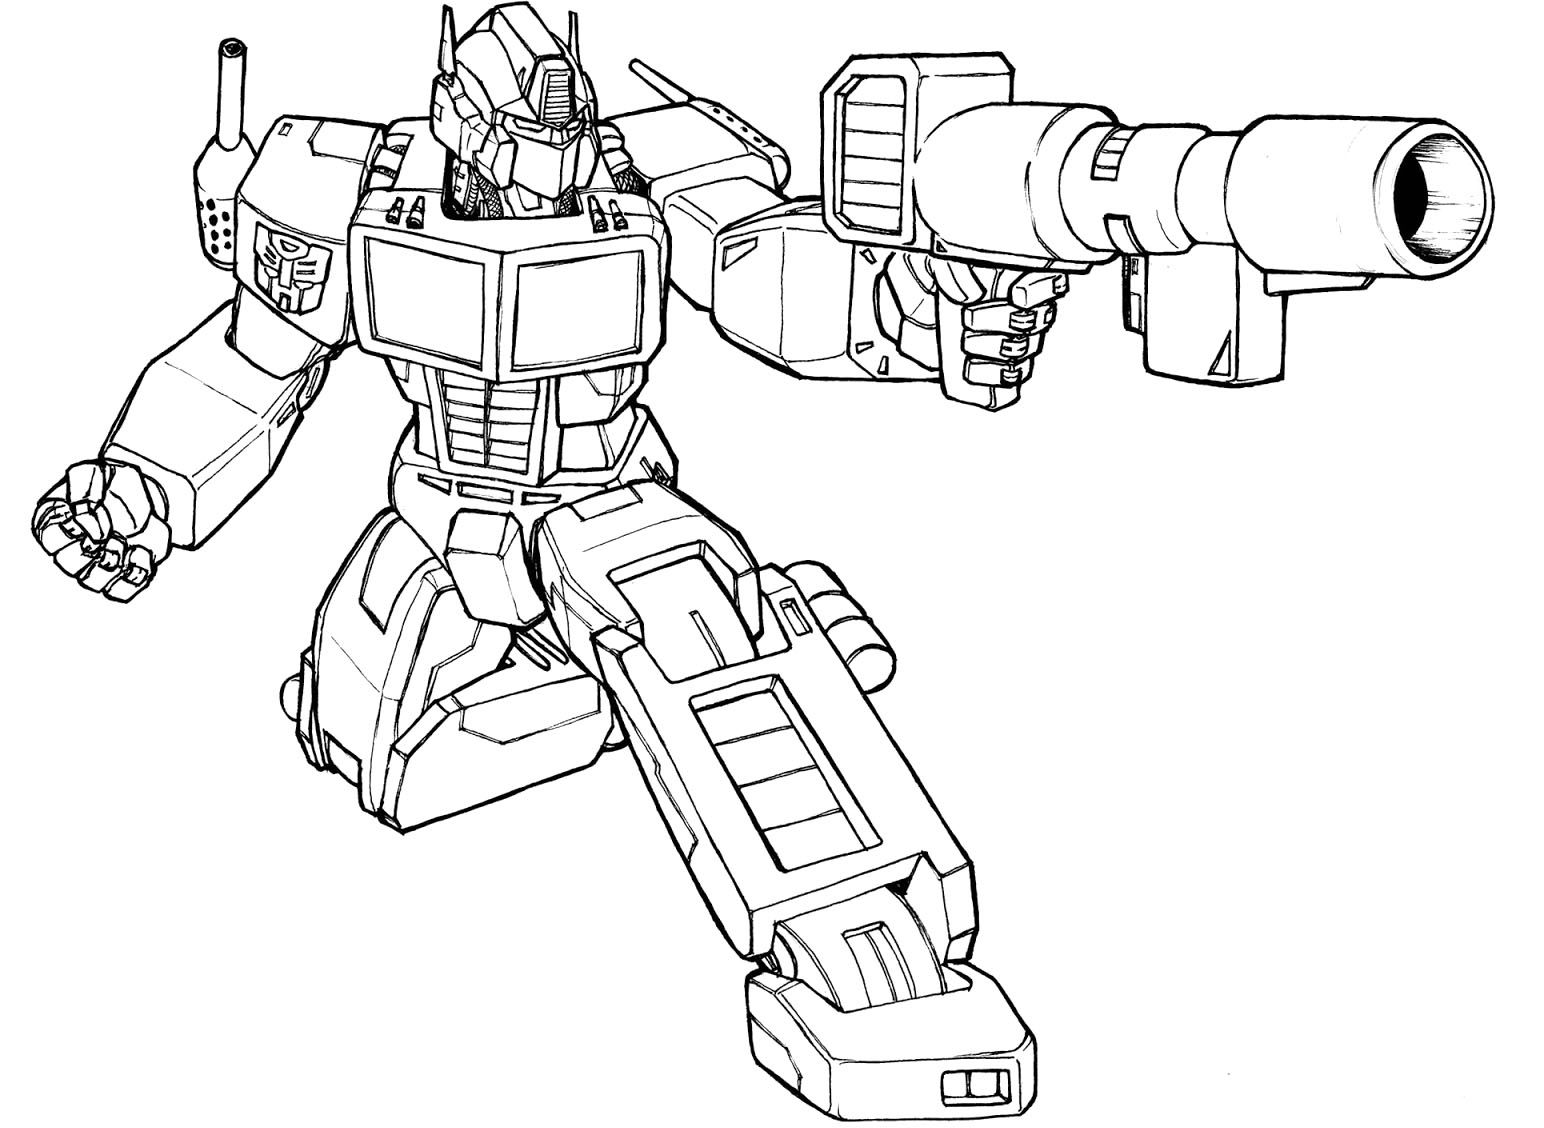 Enemy Shooting Transformers Coloring Pages | Coloring pages ...